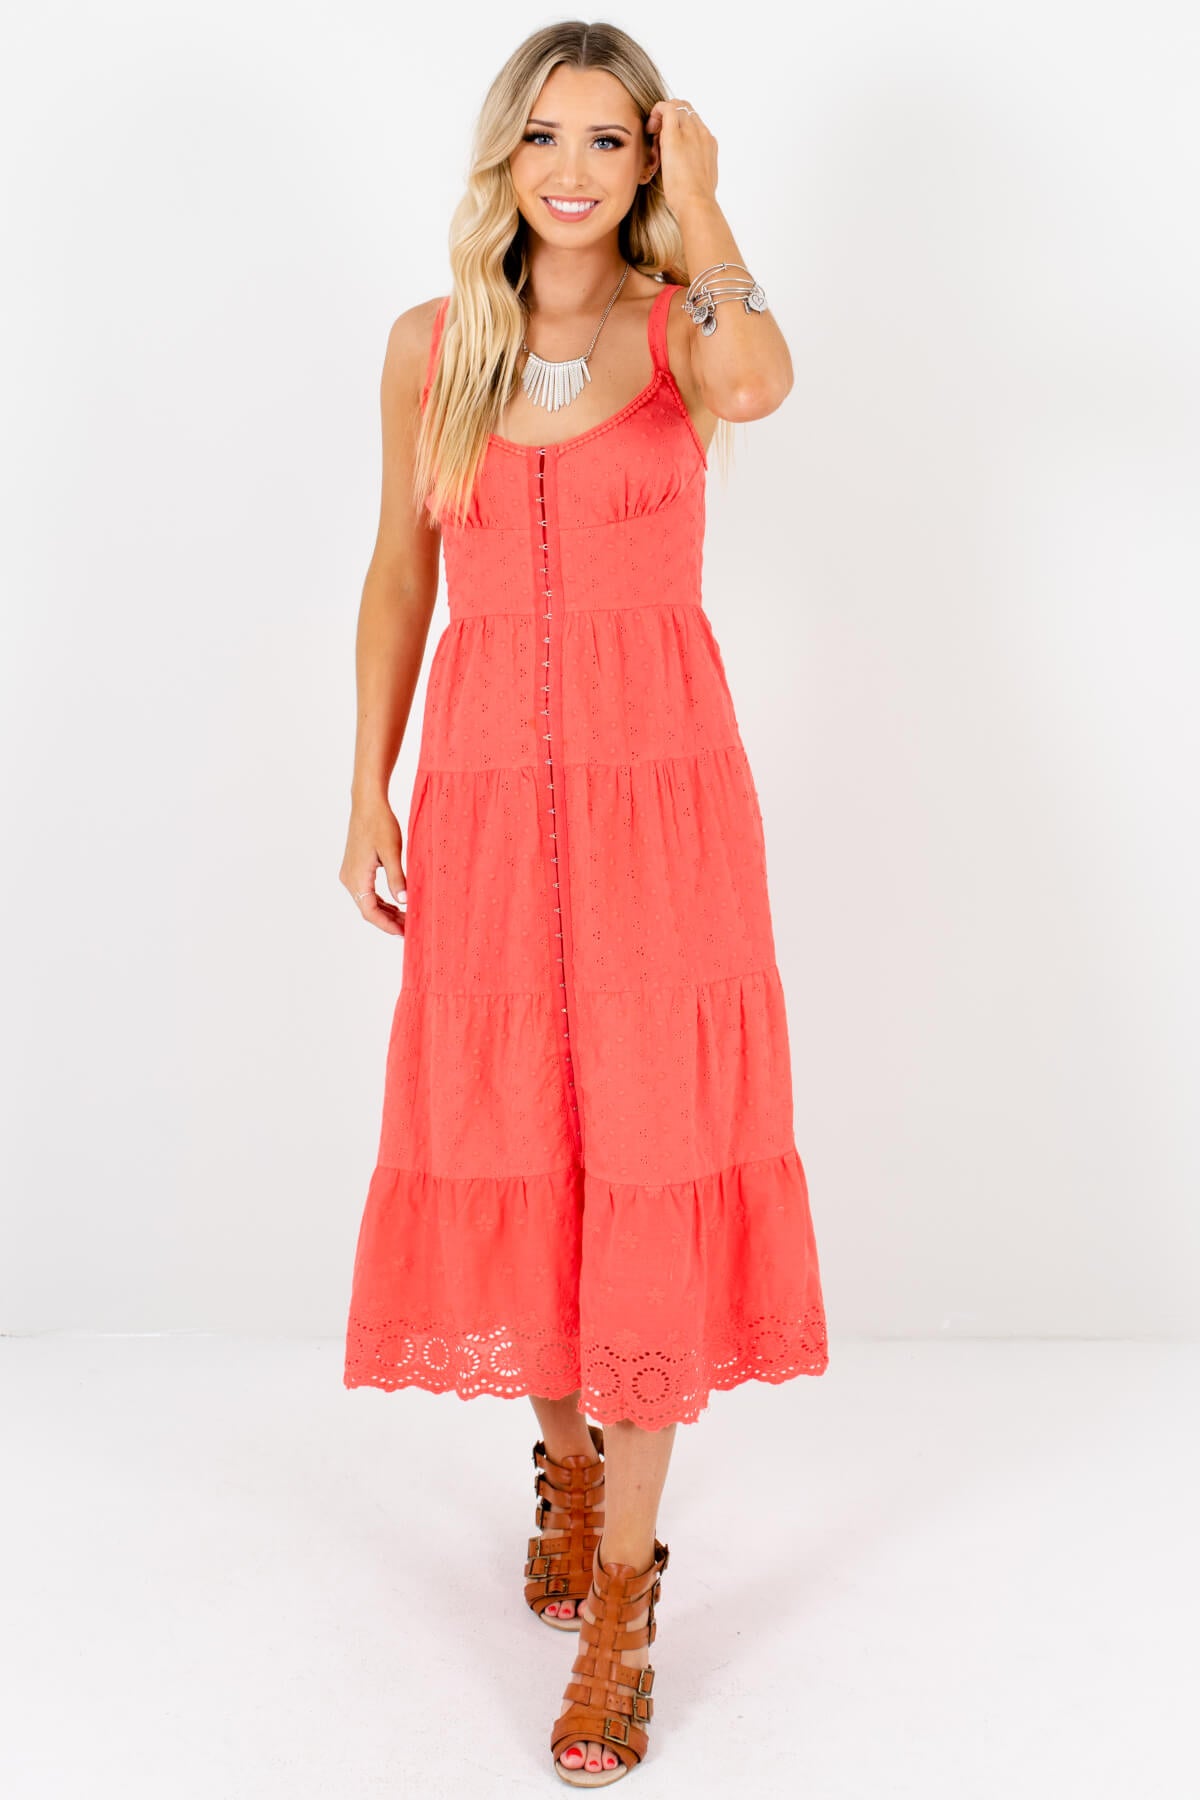 Coral Eyelet Embroidered Crochet Midi Dresses Affordable Online Boutique